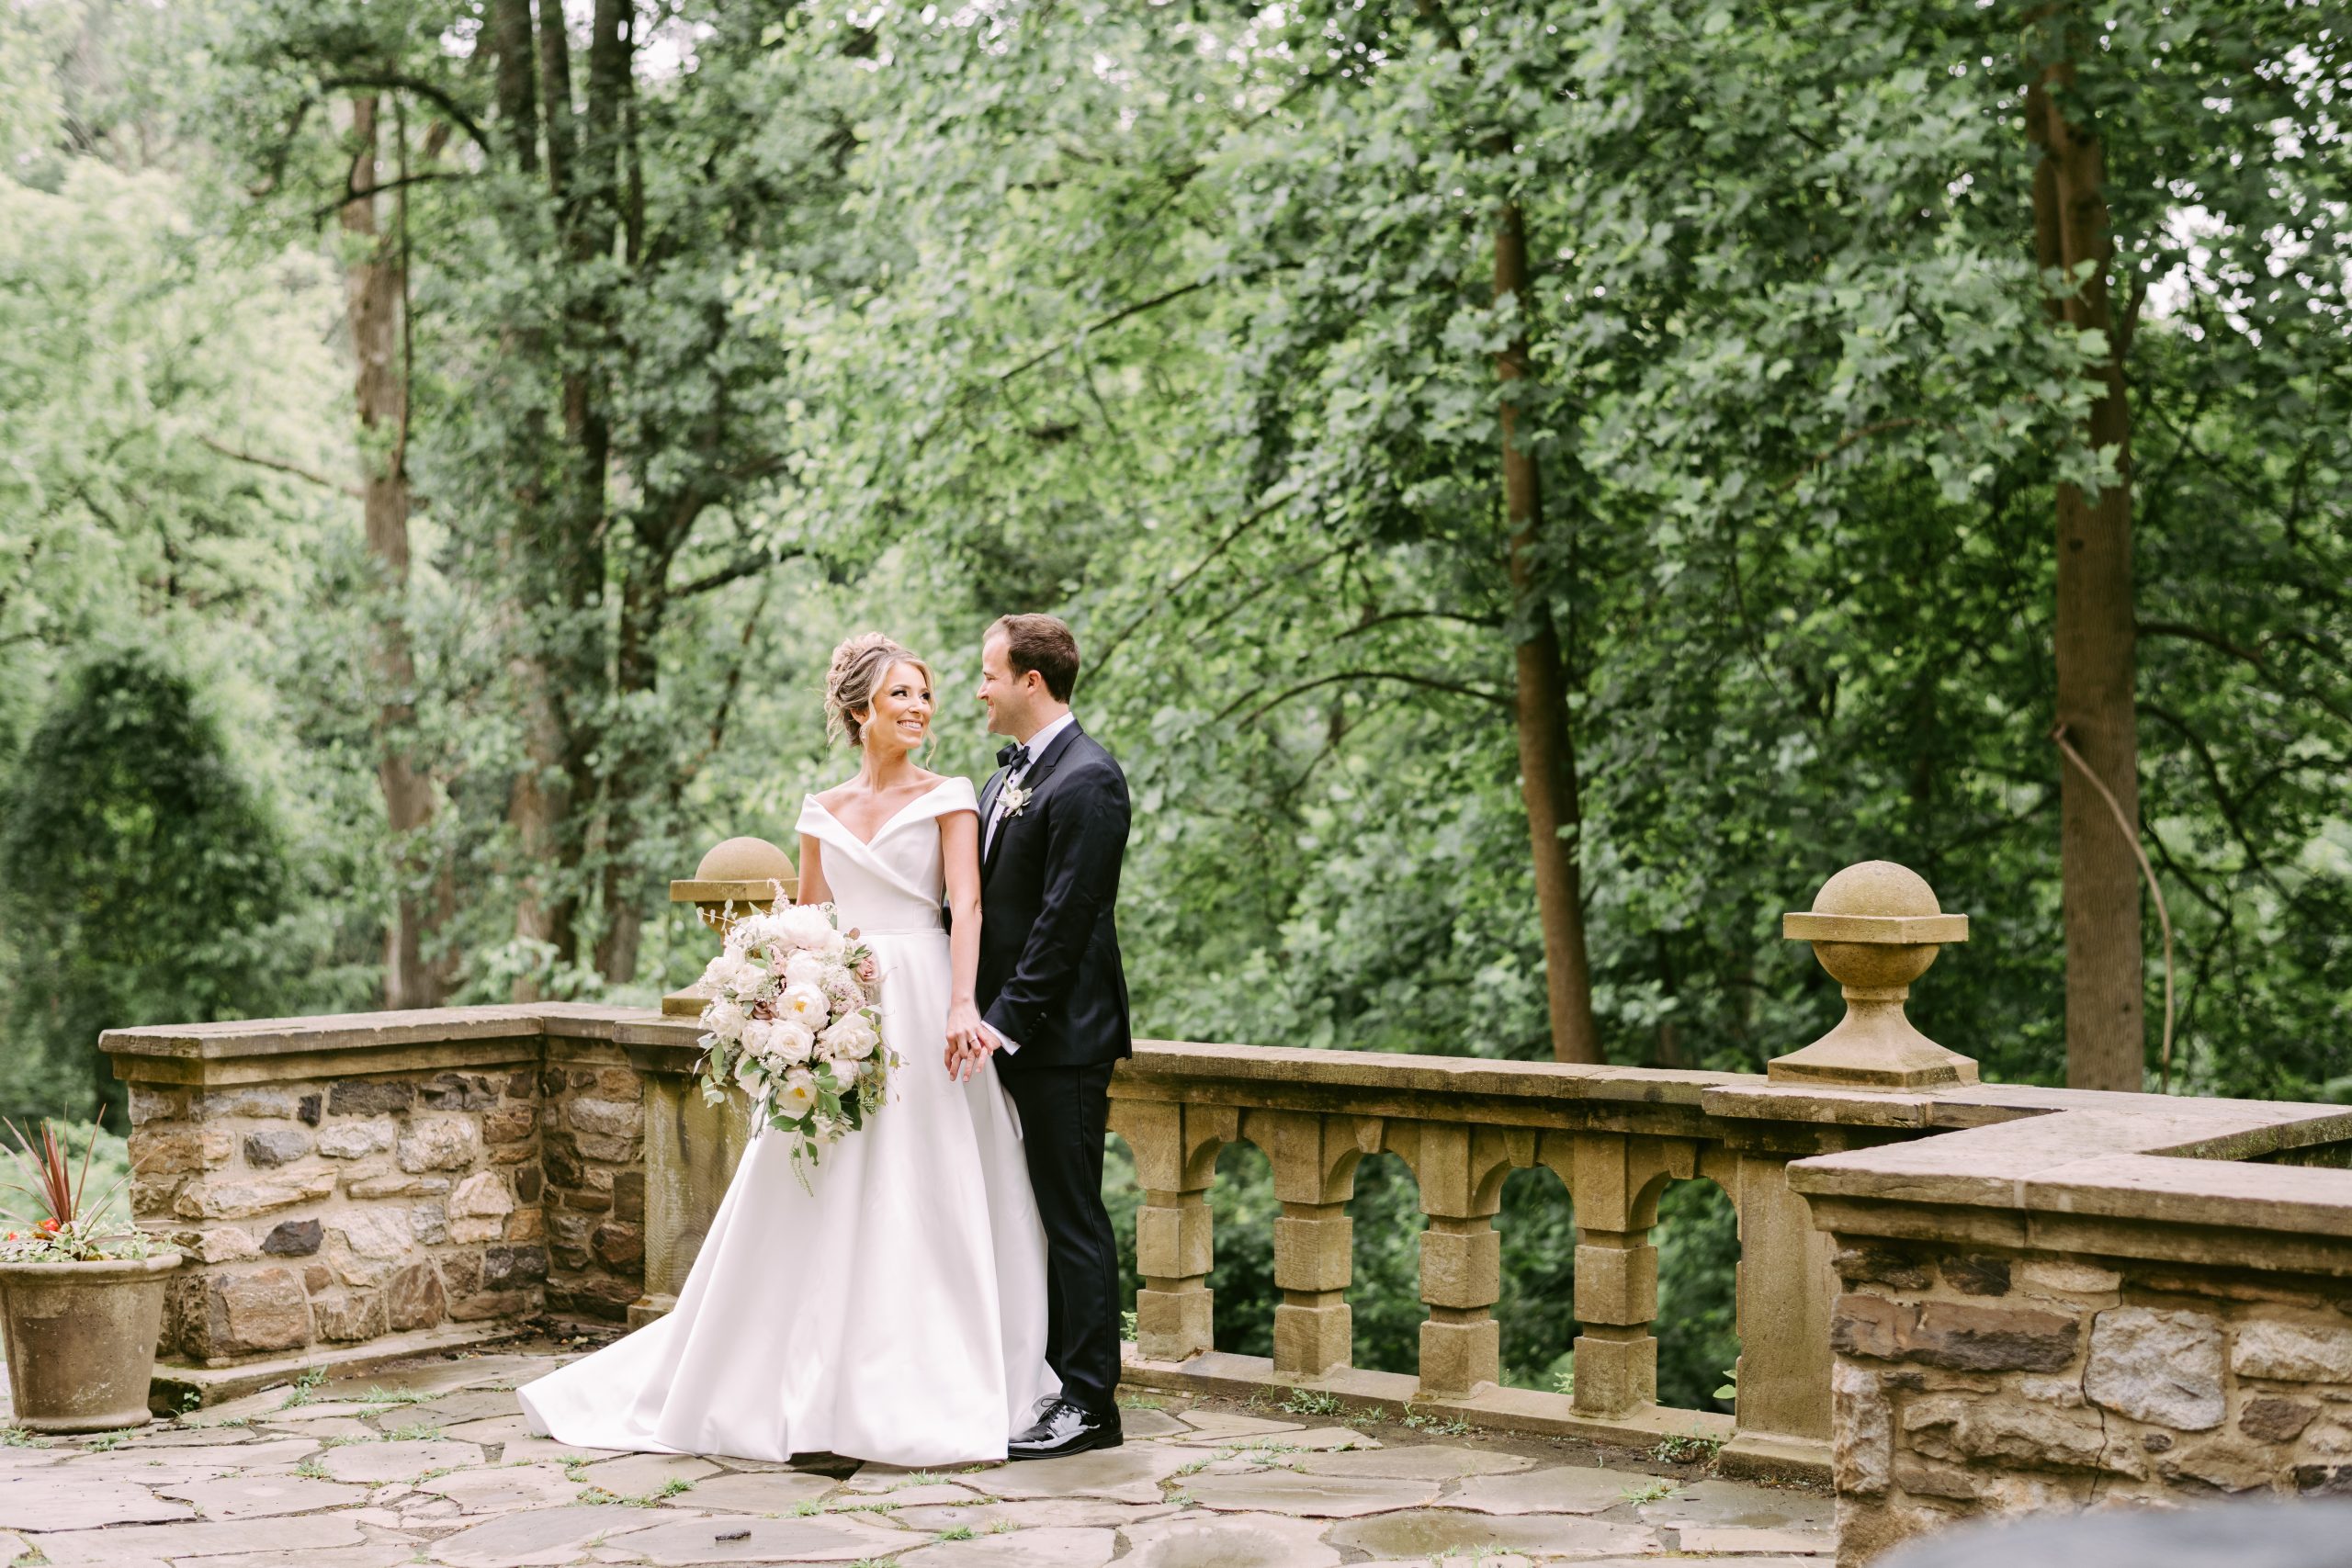 Kristen and Stephen's Whimsical Romance Wedding at Parque at Ridley Creek